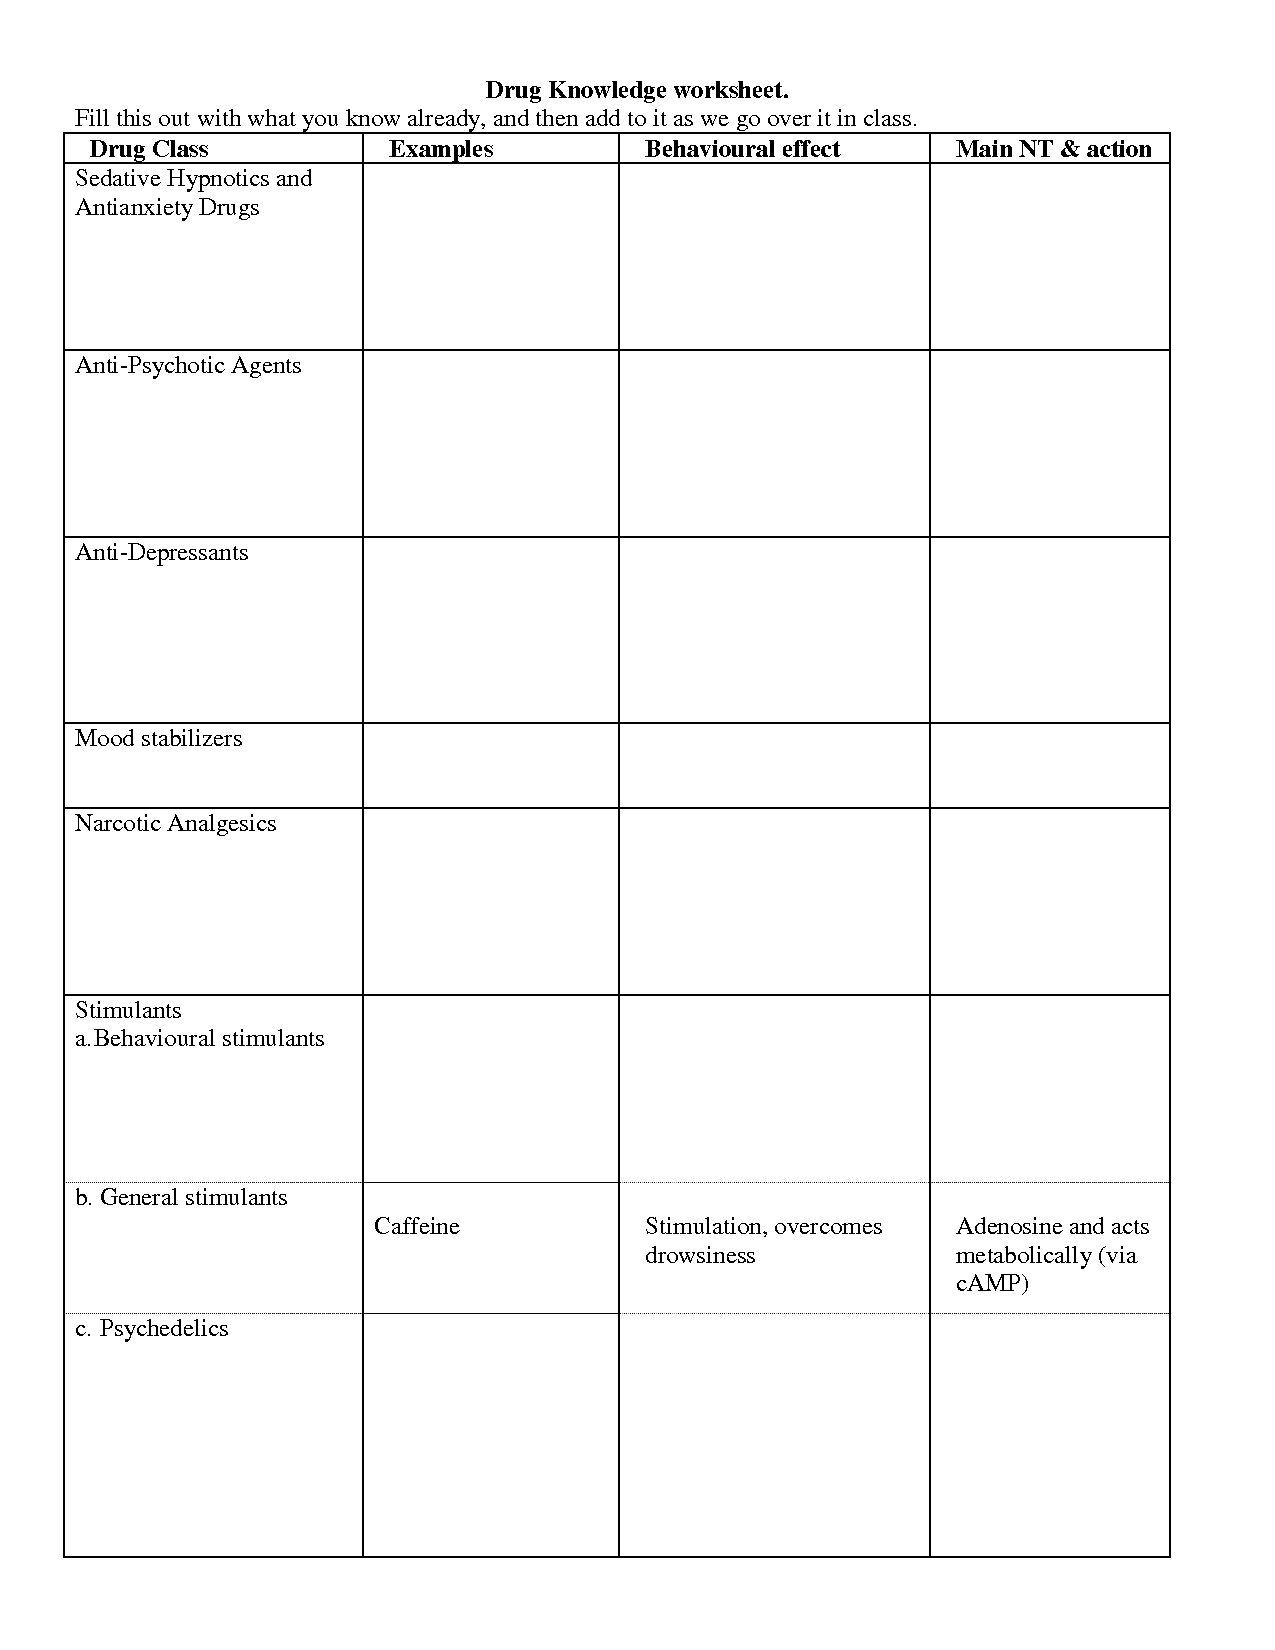 15 Best Images of Substance Abuse Family Therapy Worksheets - Substance